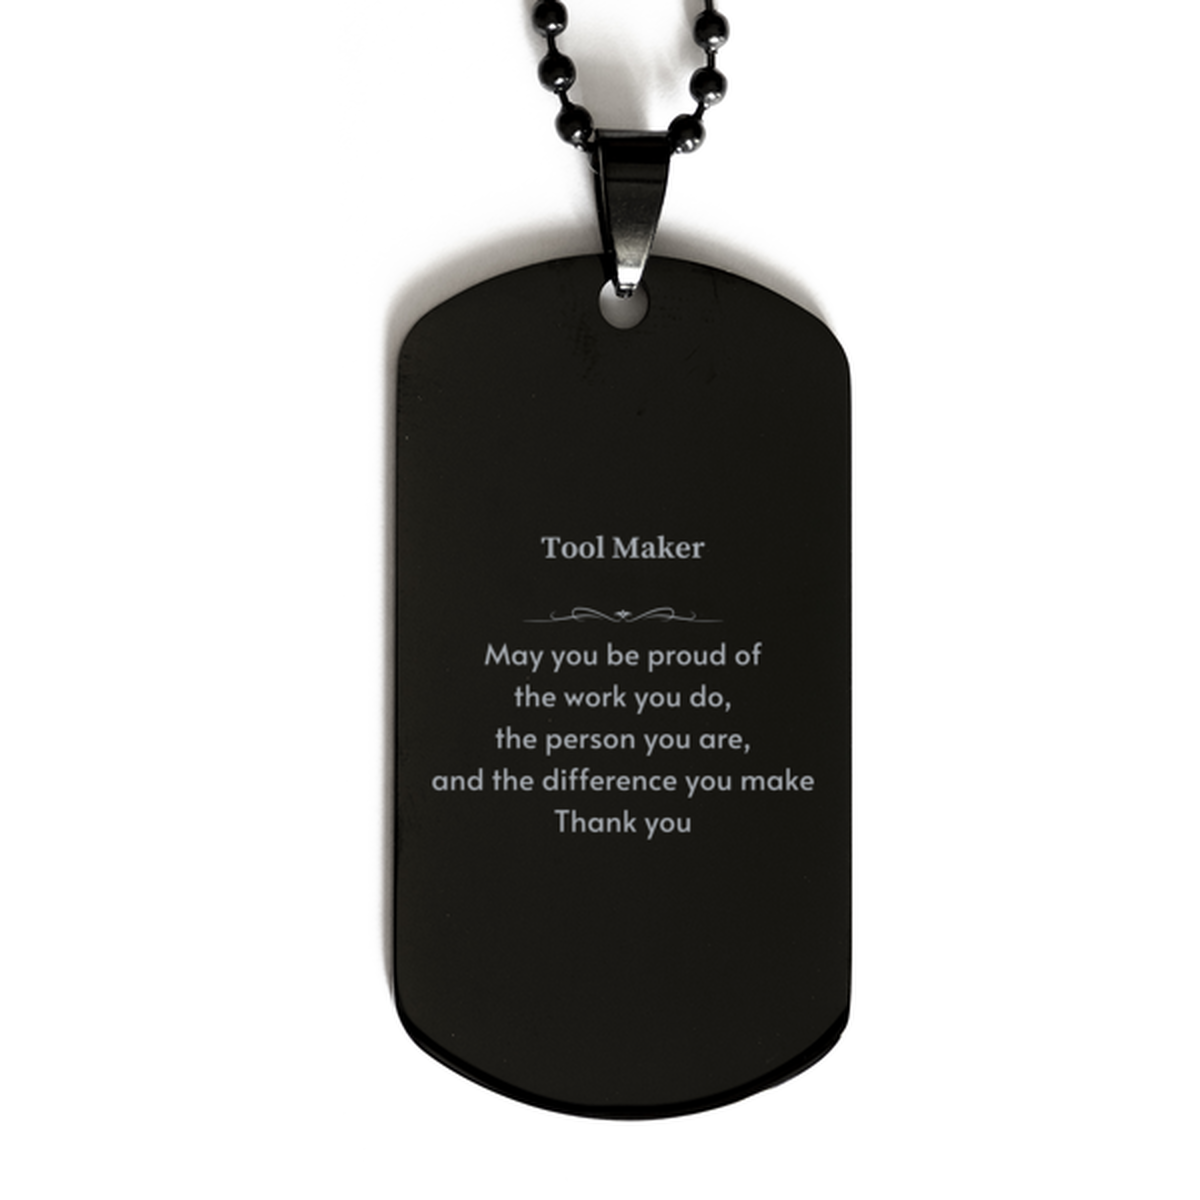 Heartwarming Black Dog Tag Retirement Coworkers Gifts for Tool Maker, Tool Maker May You be proud of the work you do, the person you are Gifts for Boss Men Women Friends